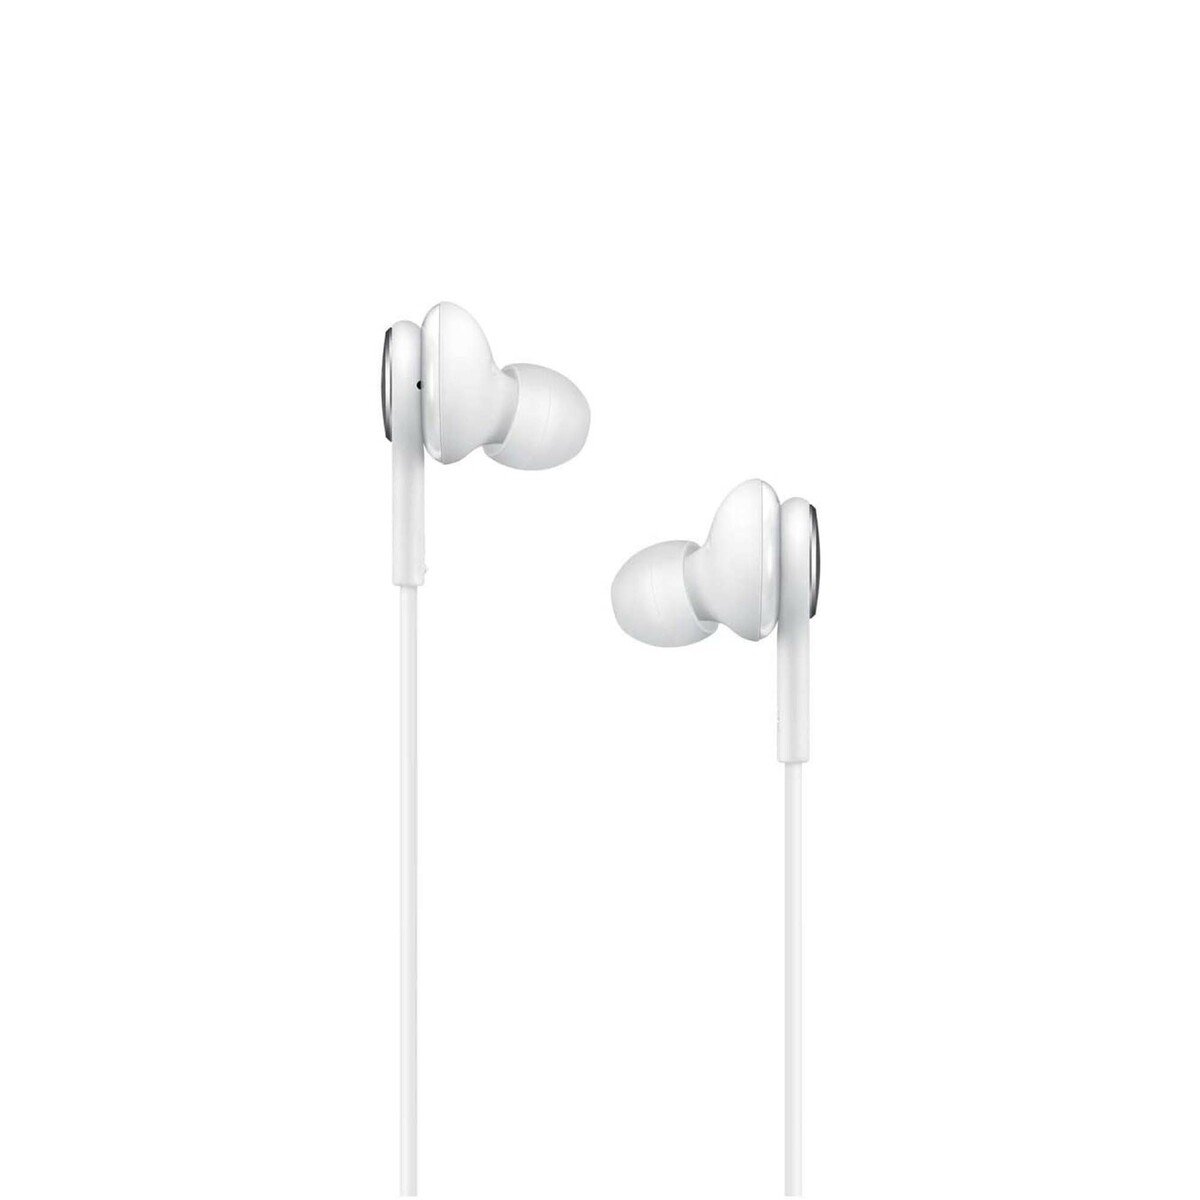 Type-C Stereo | Hands Best Samsung Mobile Free Price | Lulu In-Ear Earphones EO-IC100 at Online Kuwait (White)